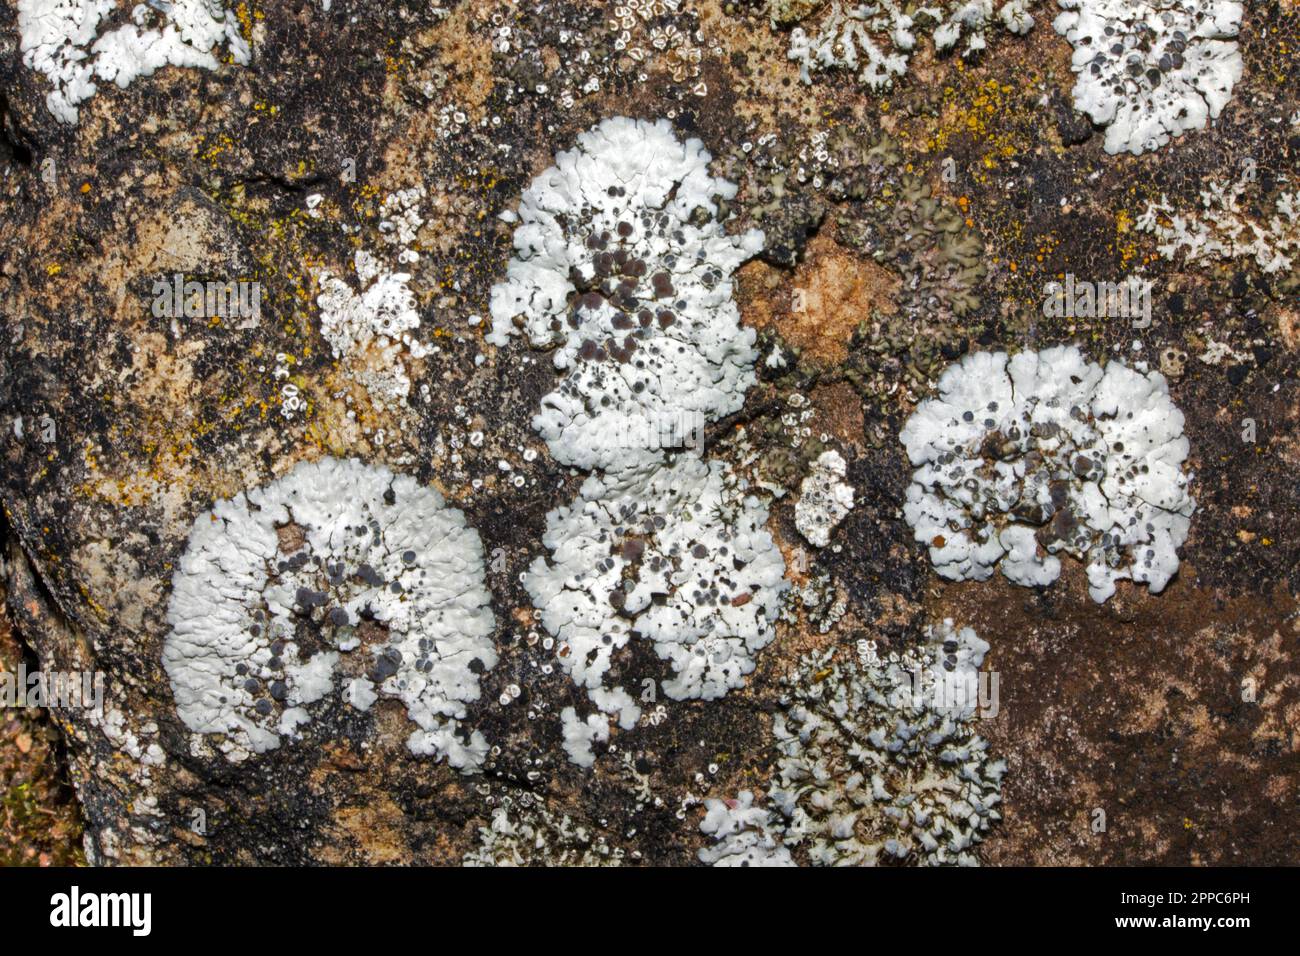 Solenopsora candicans is a rosette-forming lichen found on hard calcareous rocks. It has been found in Europe, Asia and North America. Stock Photo